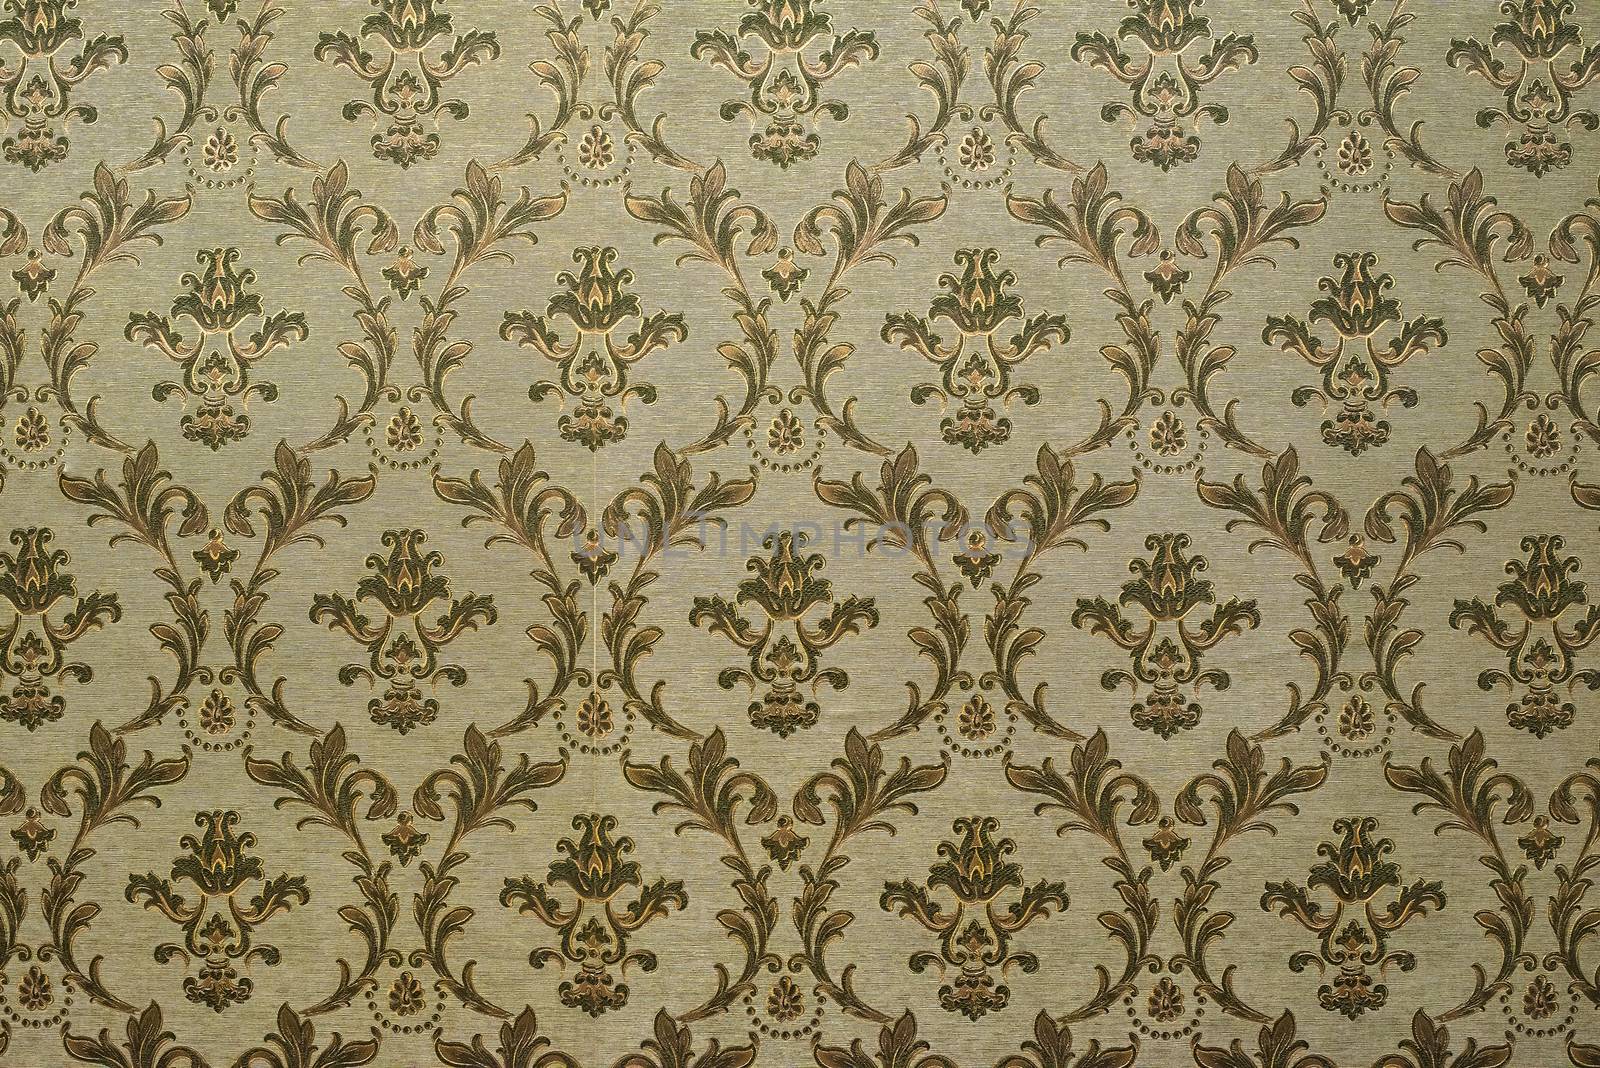 Victorian style vintage pattern on wall. Ornamental background wallpaper. Pastel tones.